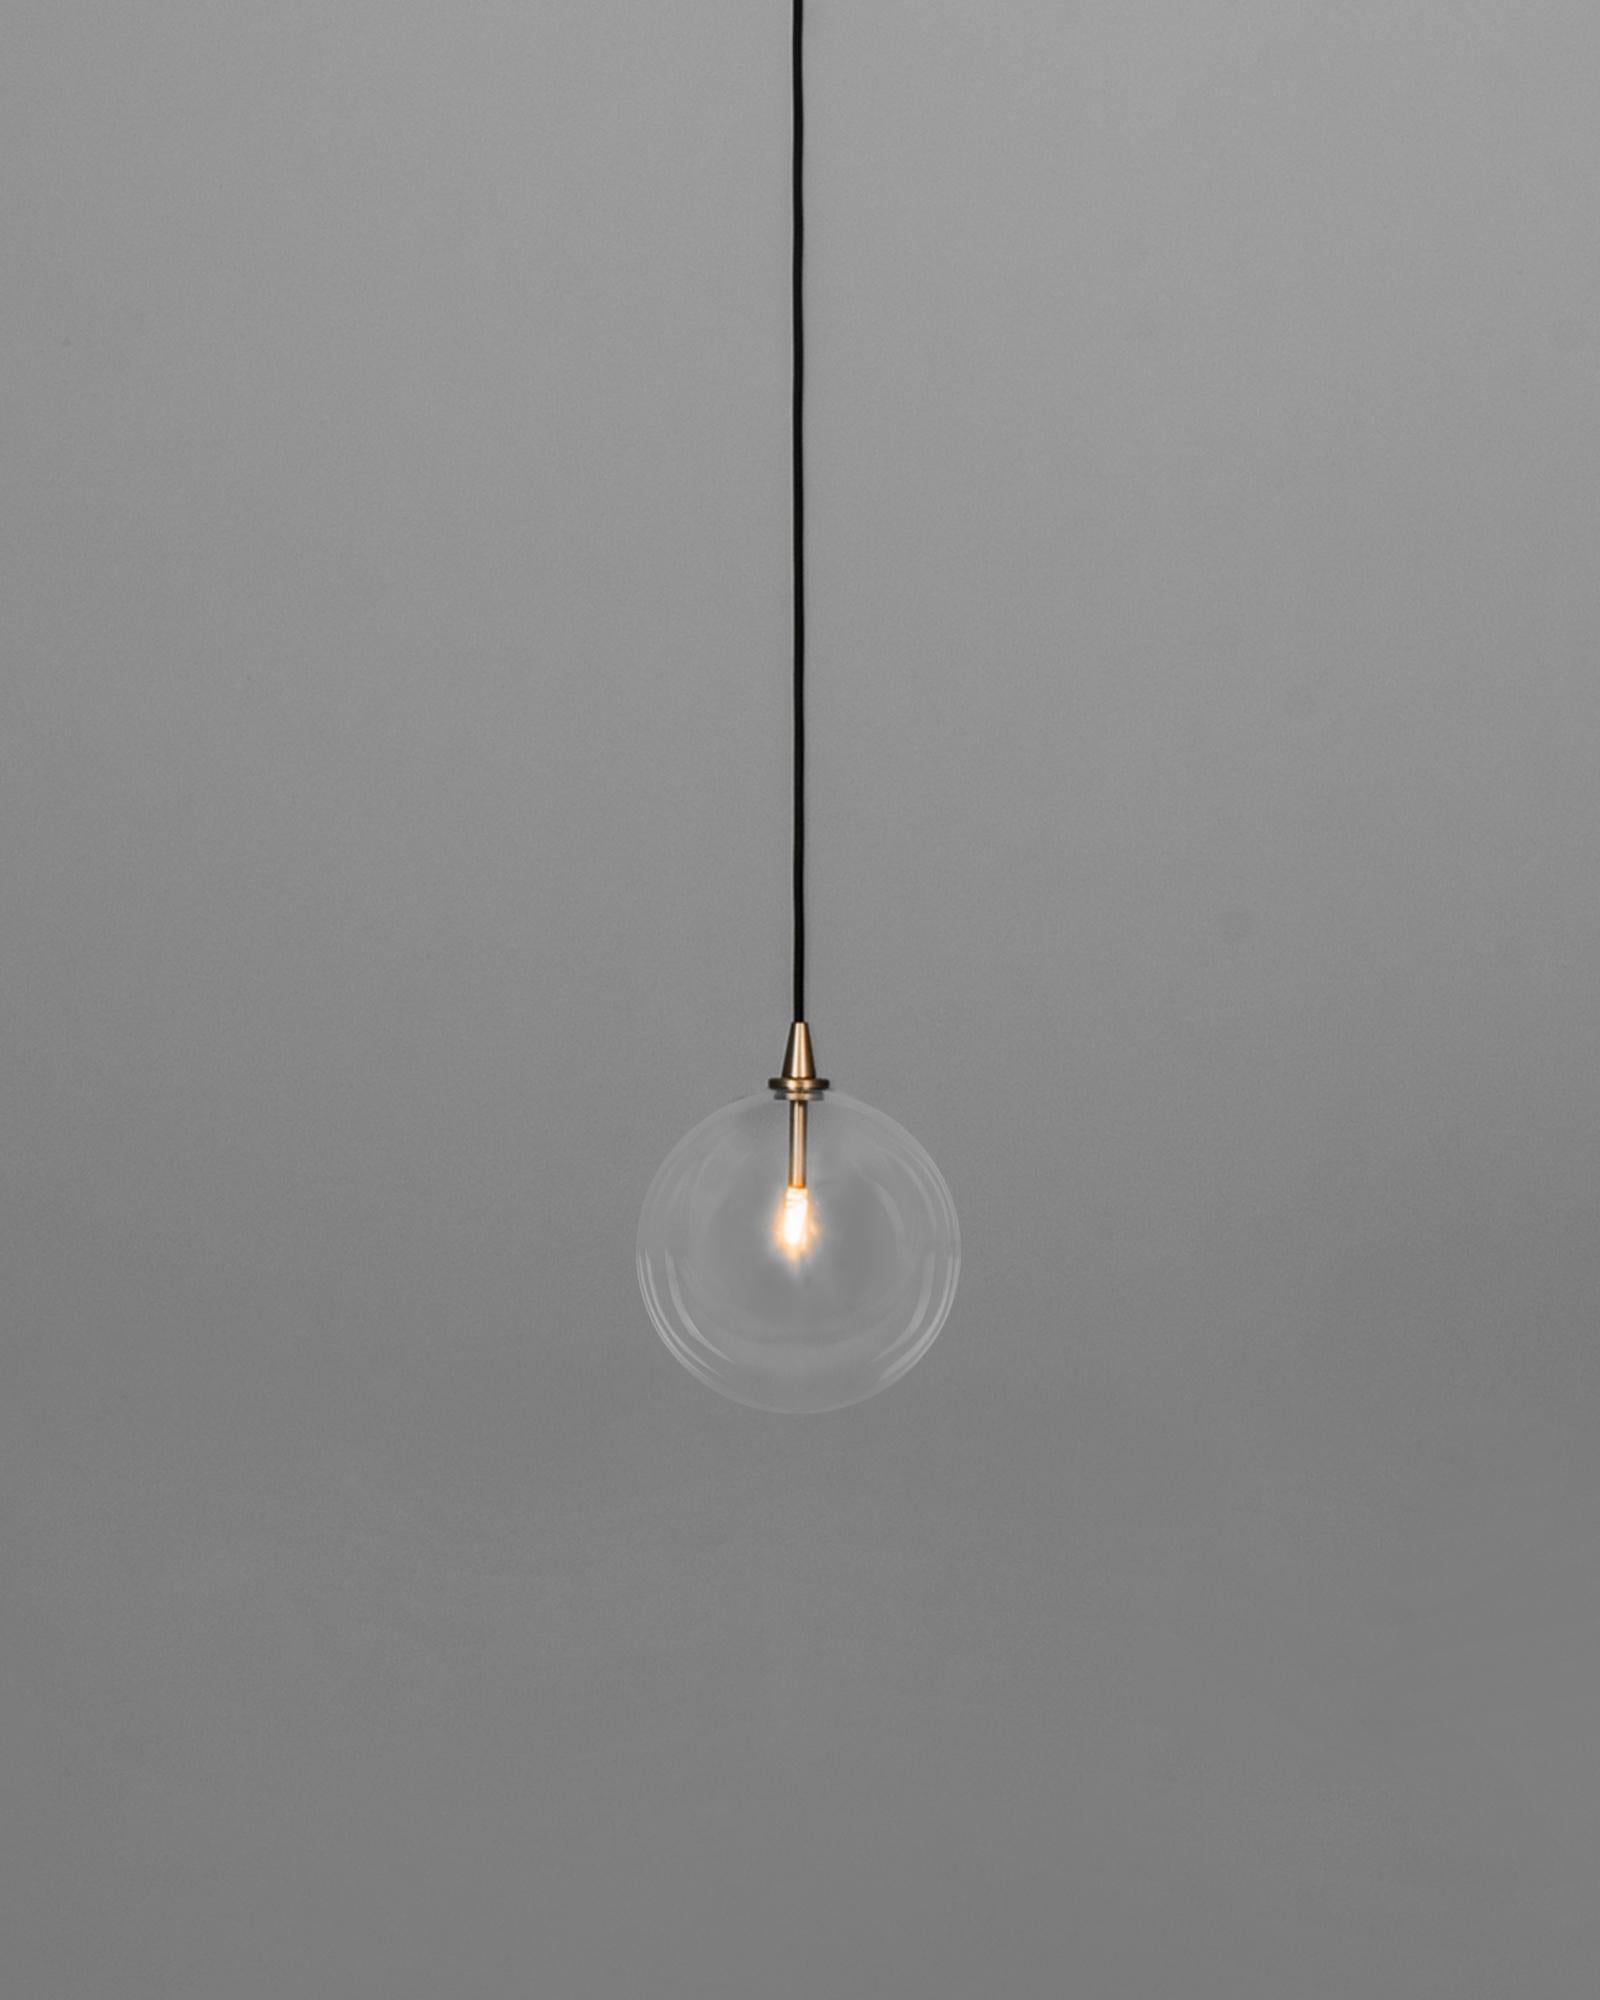 With pristine simplicity, a shining bubble of borosilicate glass hangs in effortless suspension. The crystalline clarity of the translucent sphere gifts a spontaneous, ethereal quality, aided by unassuming brass ceiling fixtures.

Schwung